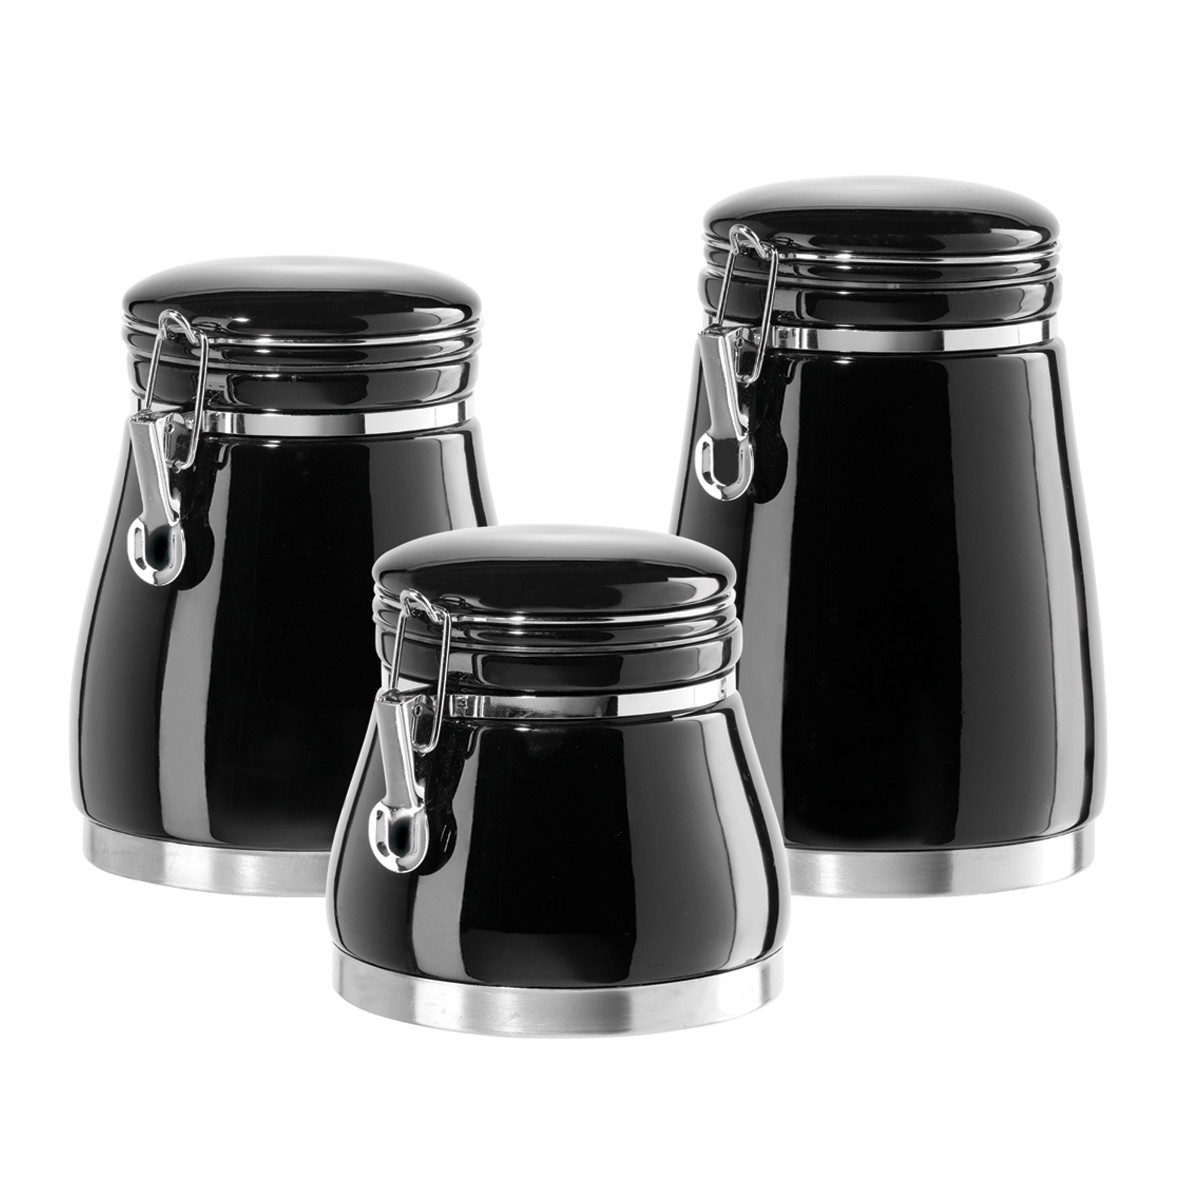 Kitchen Storage Canister
 Gift & Home Today Storage canisters for the kitchen